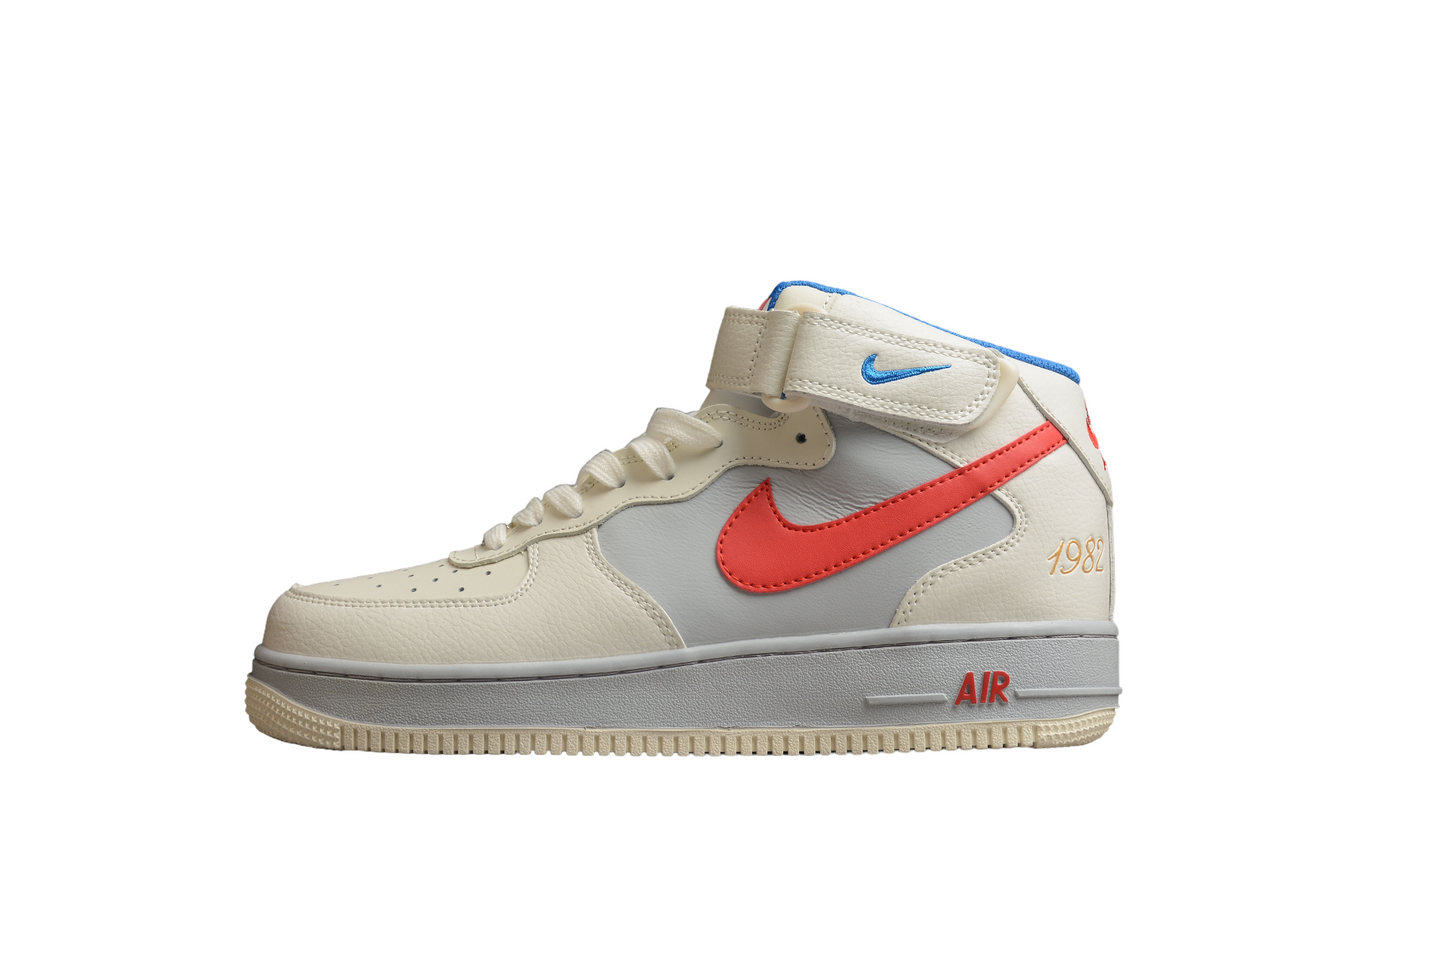 Nike Air Force 1 Mid 1.07 1982